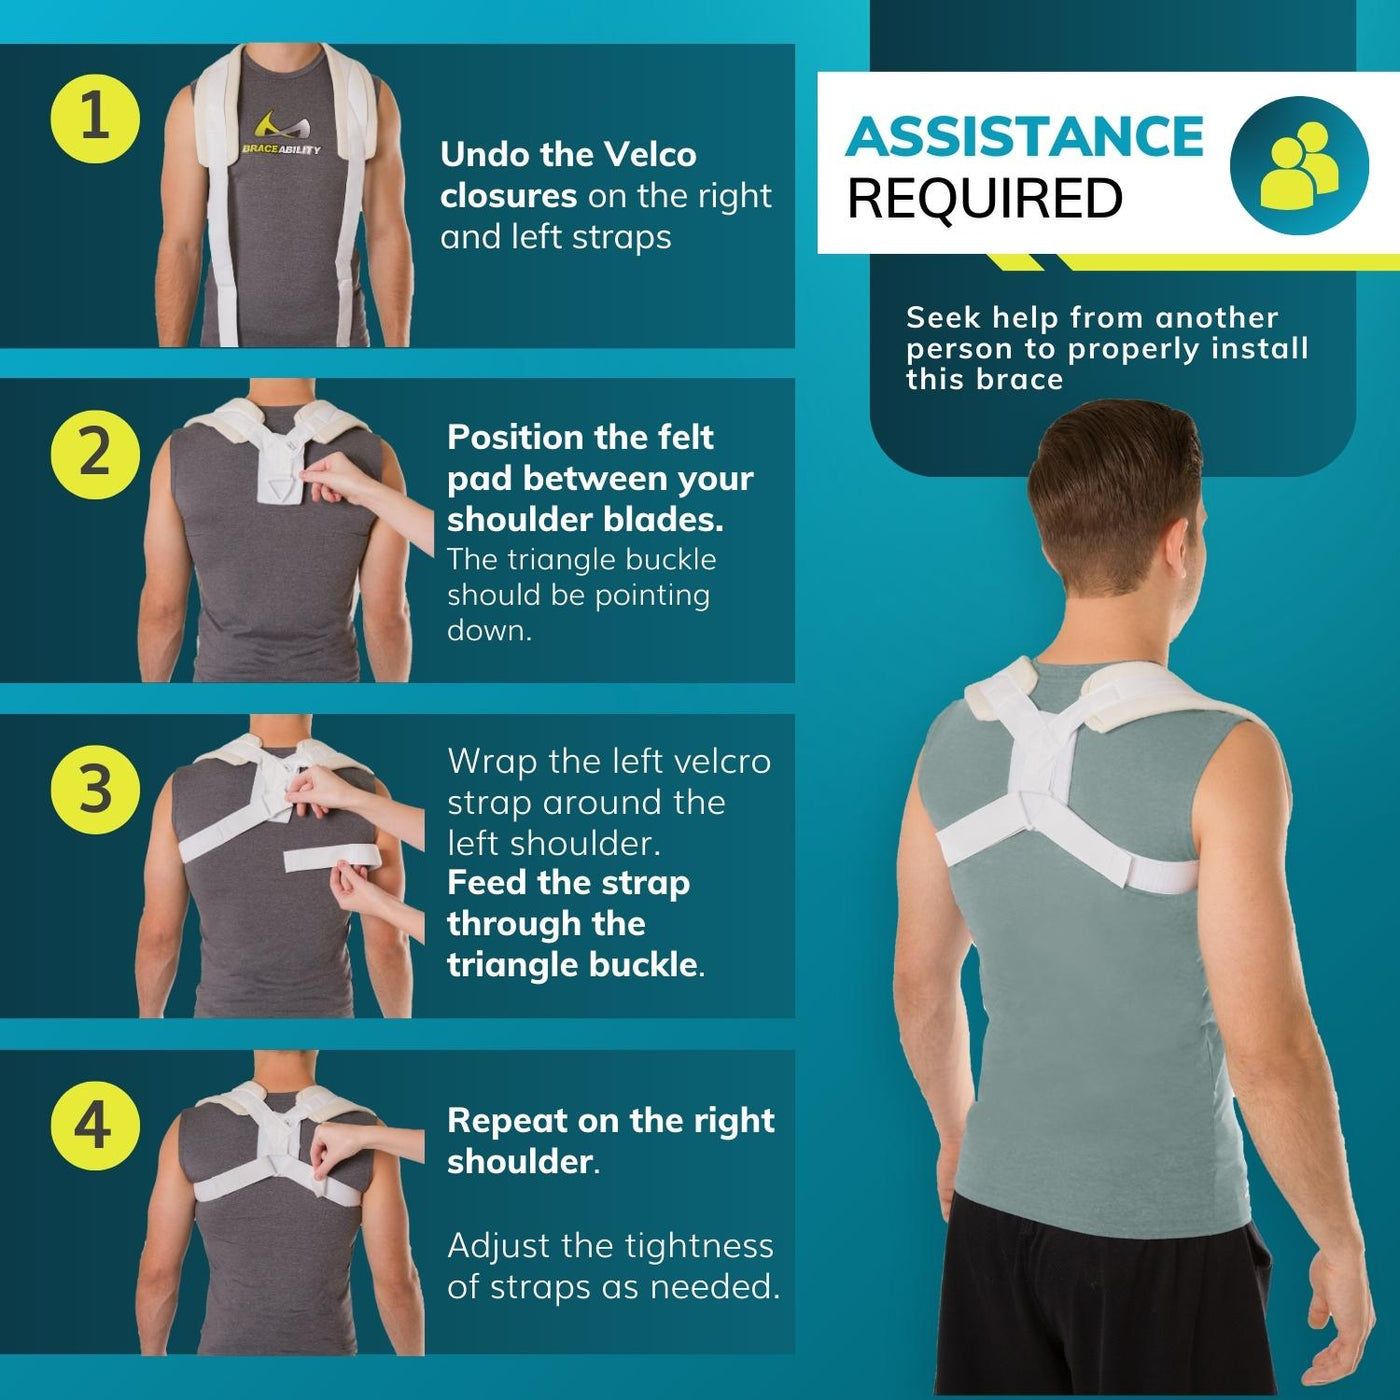 You will need someone to help you apply, adjust, and remove this clavicle brace